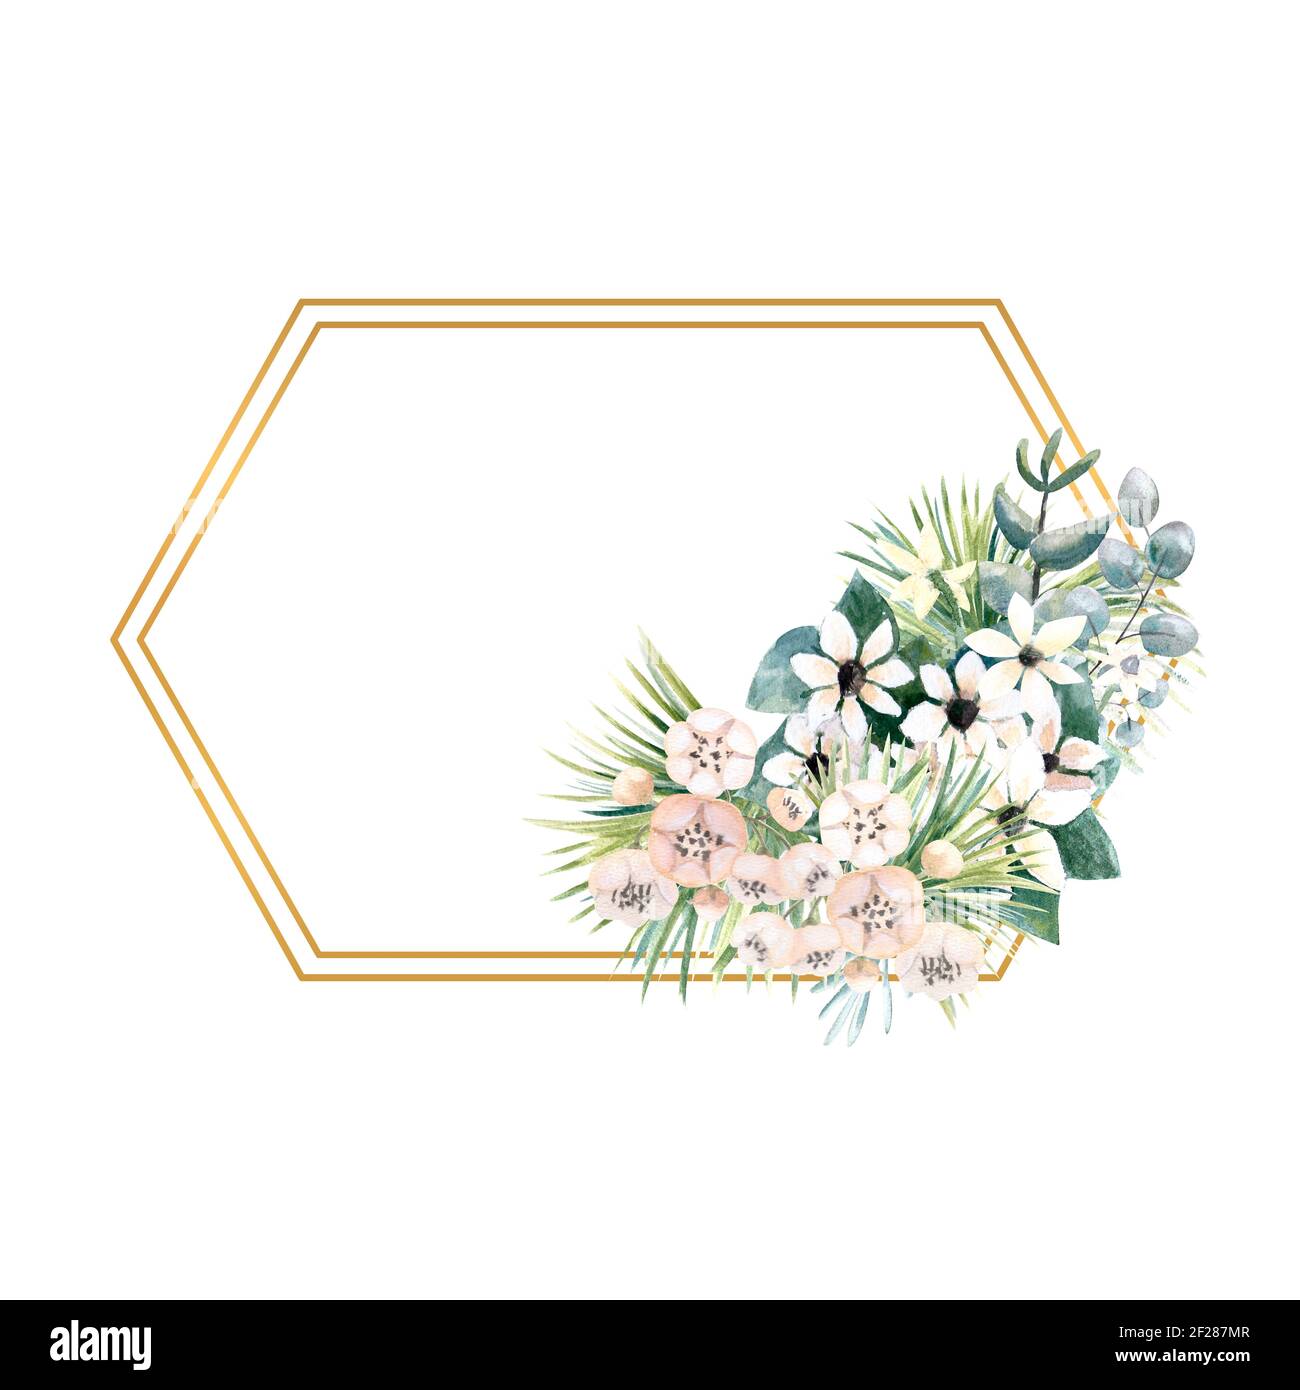 Hexagonal gold frame with small flowers of actinidia, bouvardia, tropical and palm leaves. Wedding bouquet in a frame for the design of a stylish Stock Photo